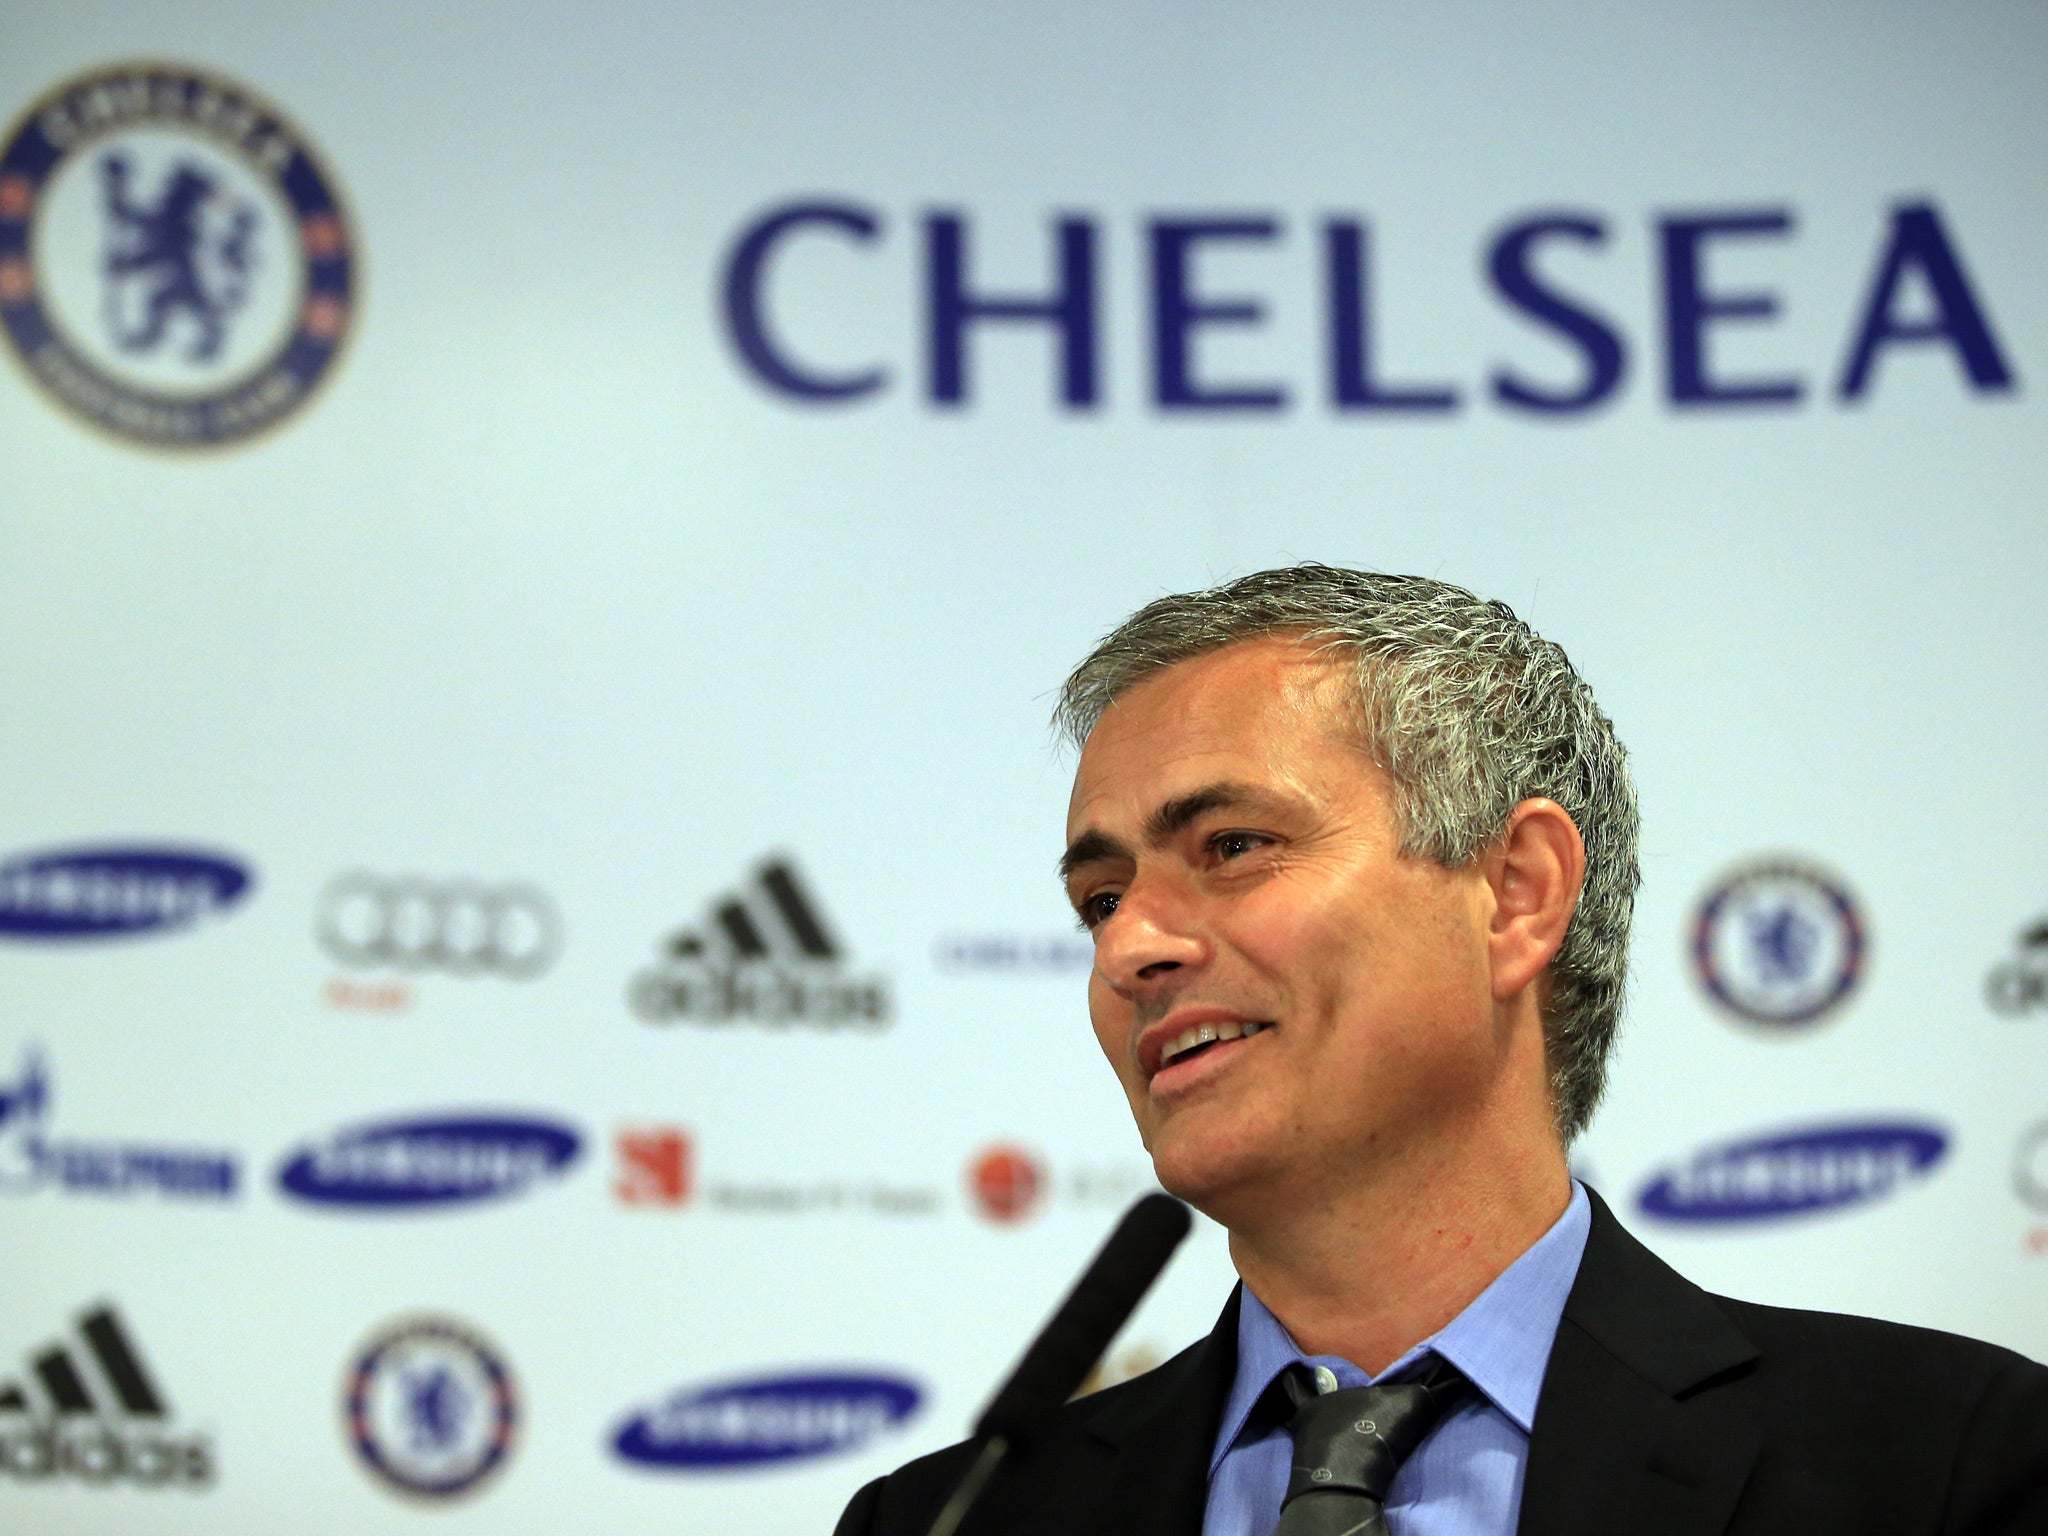 Jose Mourinho addresses the media at his first press conference since being reinstated as Chelsea manager